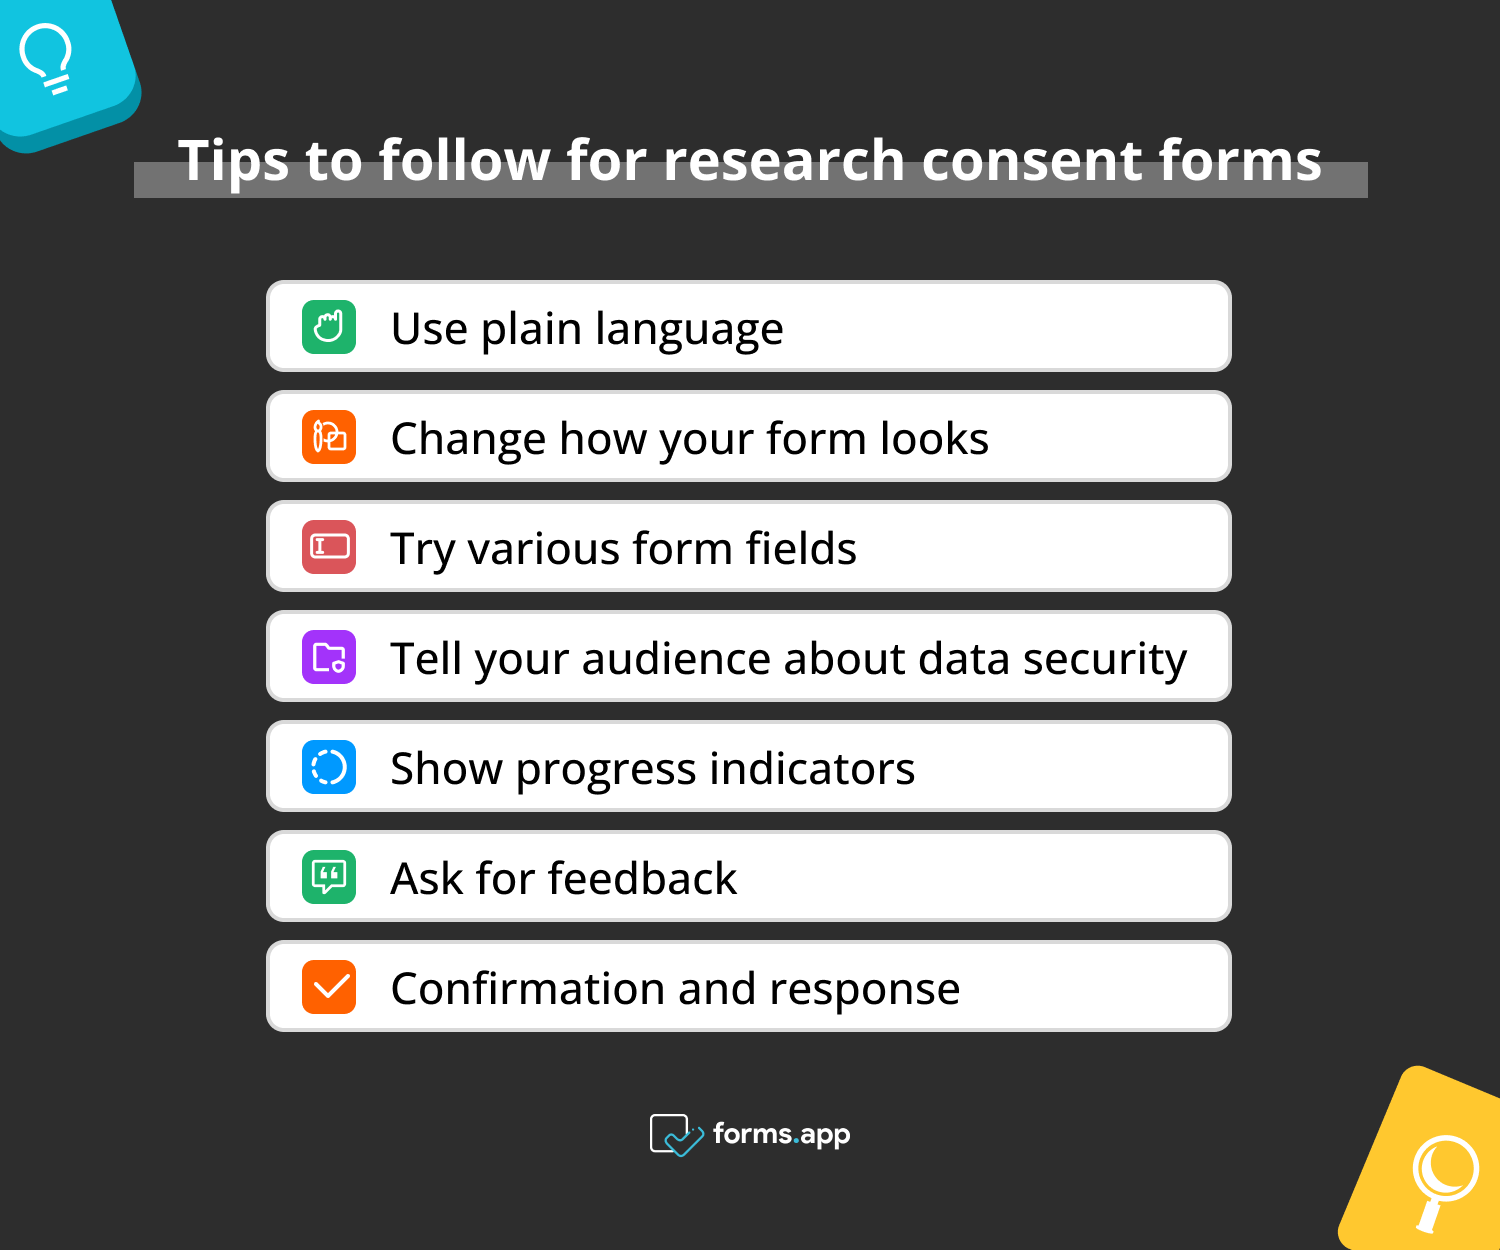 Tips to consider while creating research consent forms